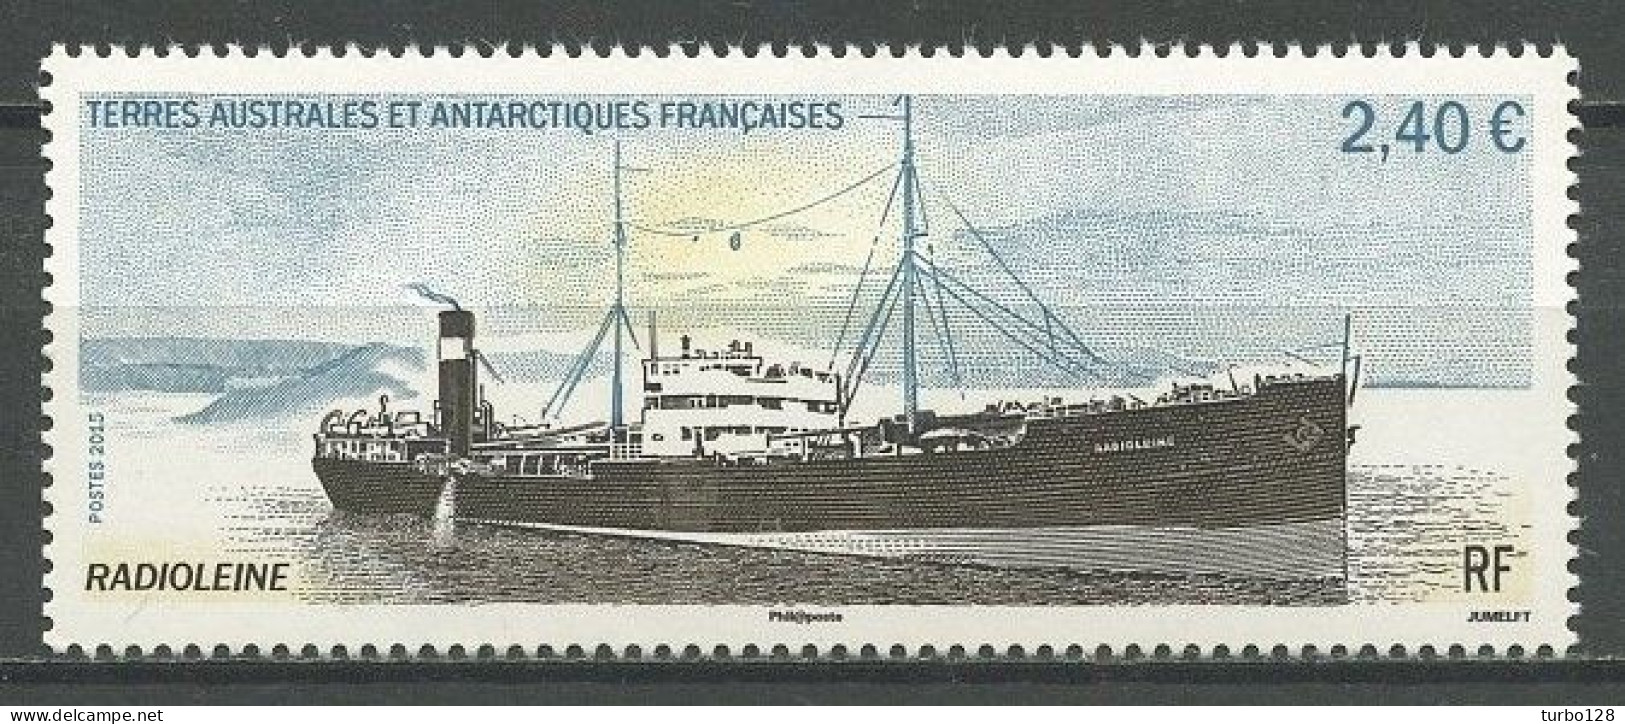 TAAF 2015  N° 724 ** Neuf MNH Superbe Bateaux Navire Usine Phoquier Le Radioleine Transports Ships Boats - Unused Stamps